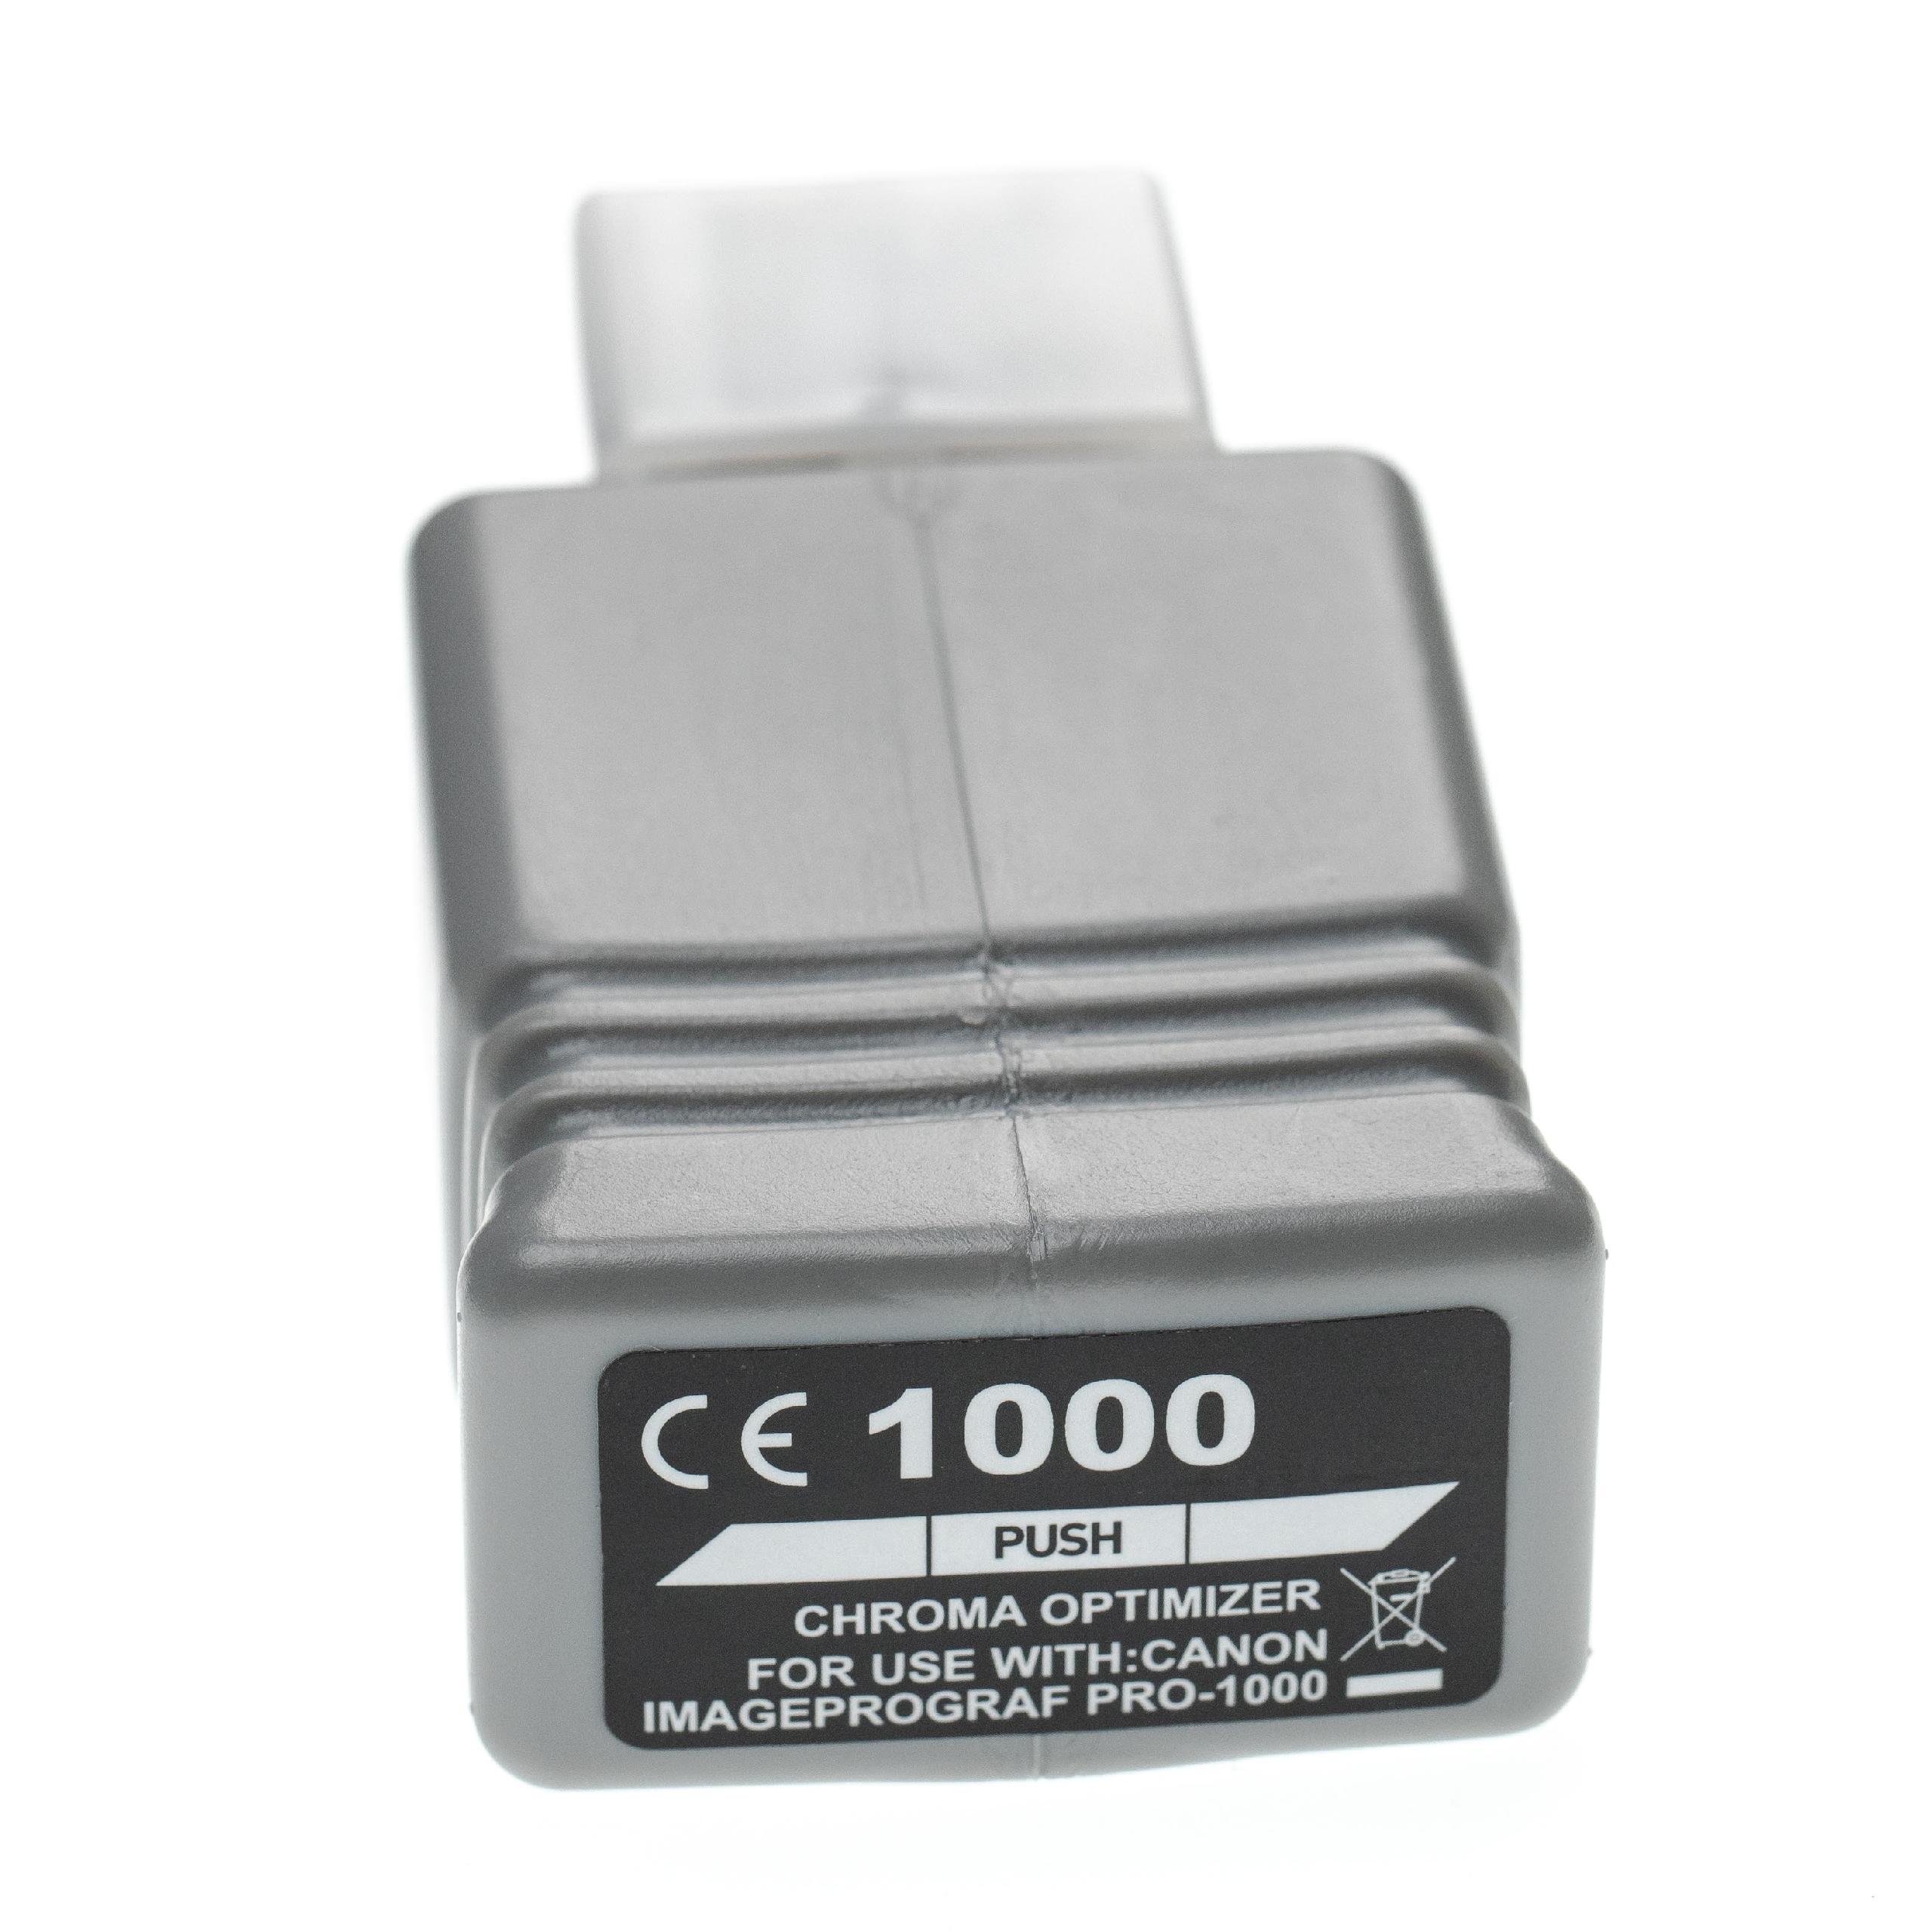 Ink Cartridge as Exchange for Canon PFI-1000CO for Canon Printer - Chroma Optimizer 80 ml + Chip